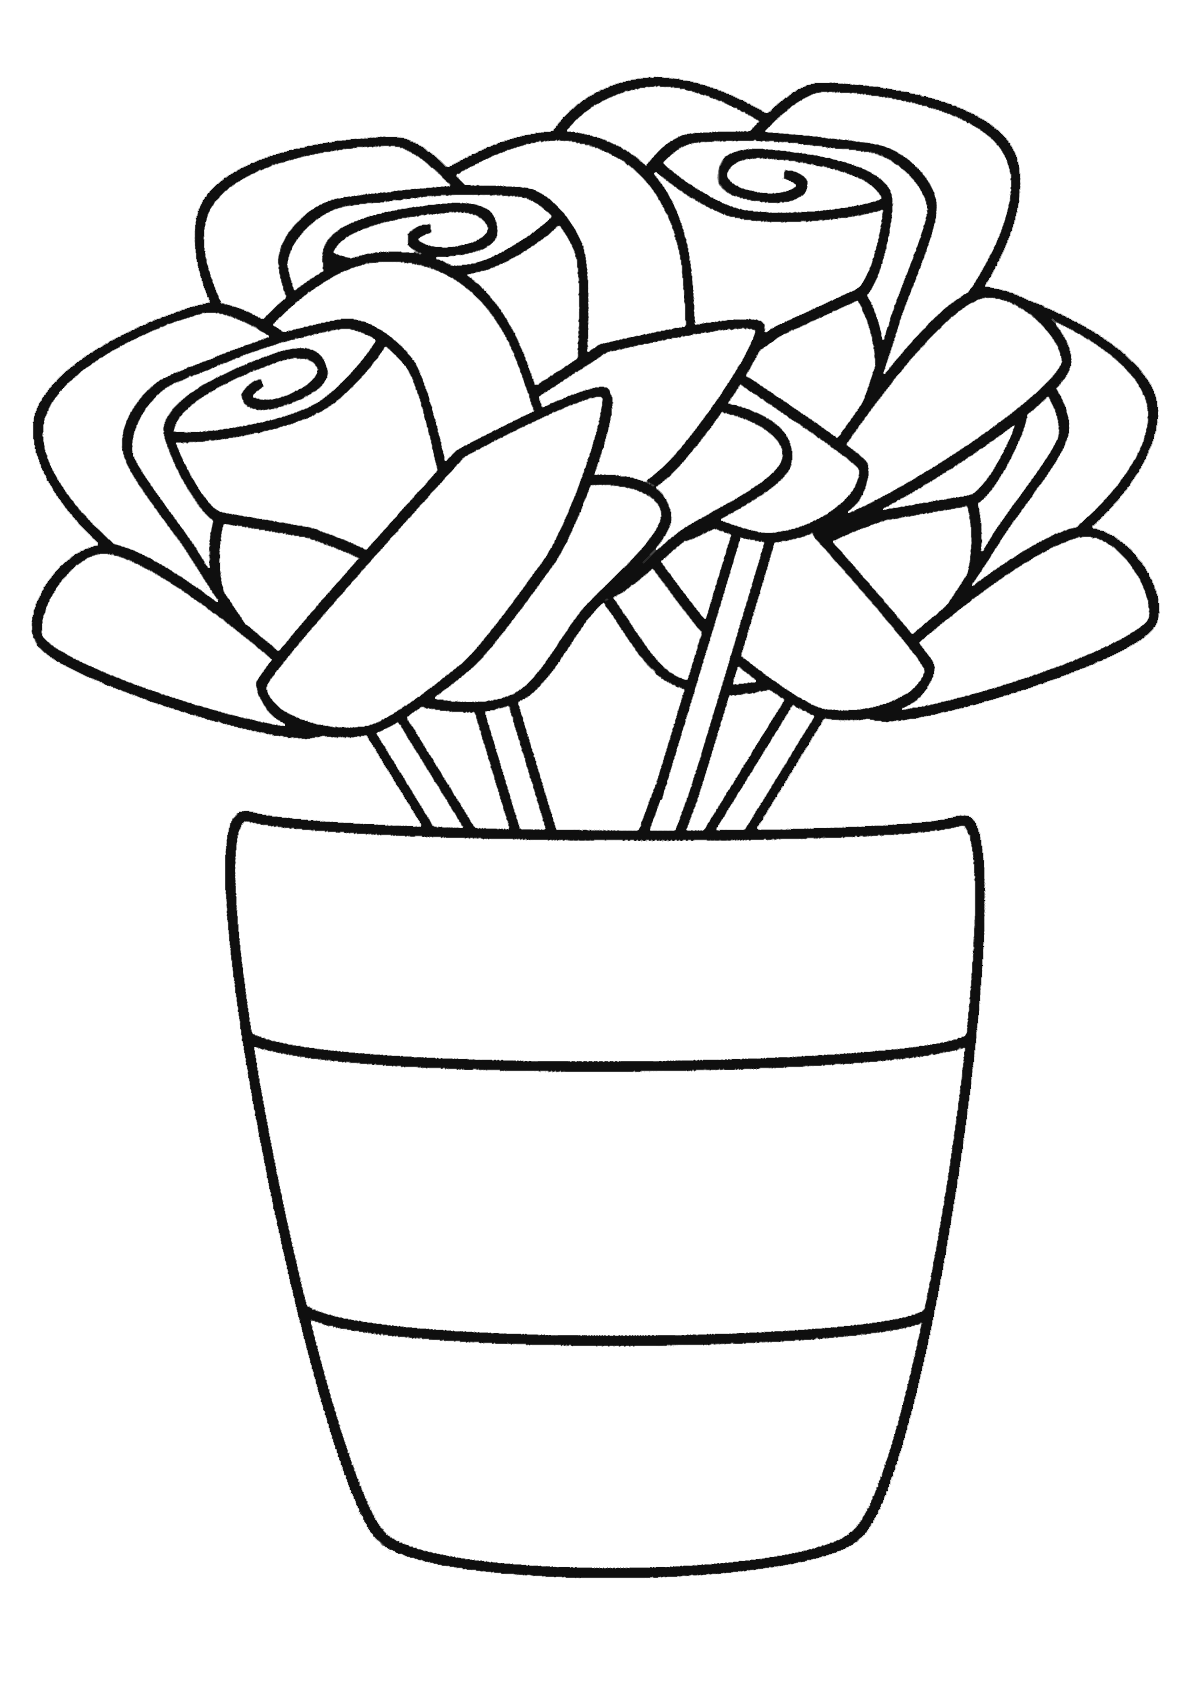 Coloring flower bouquet for mom